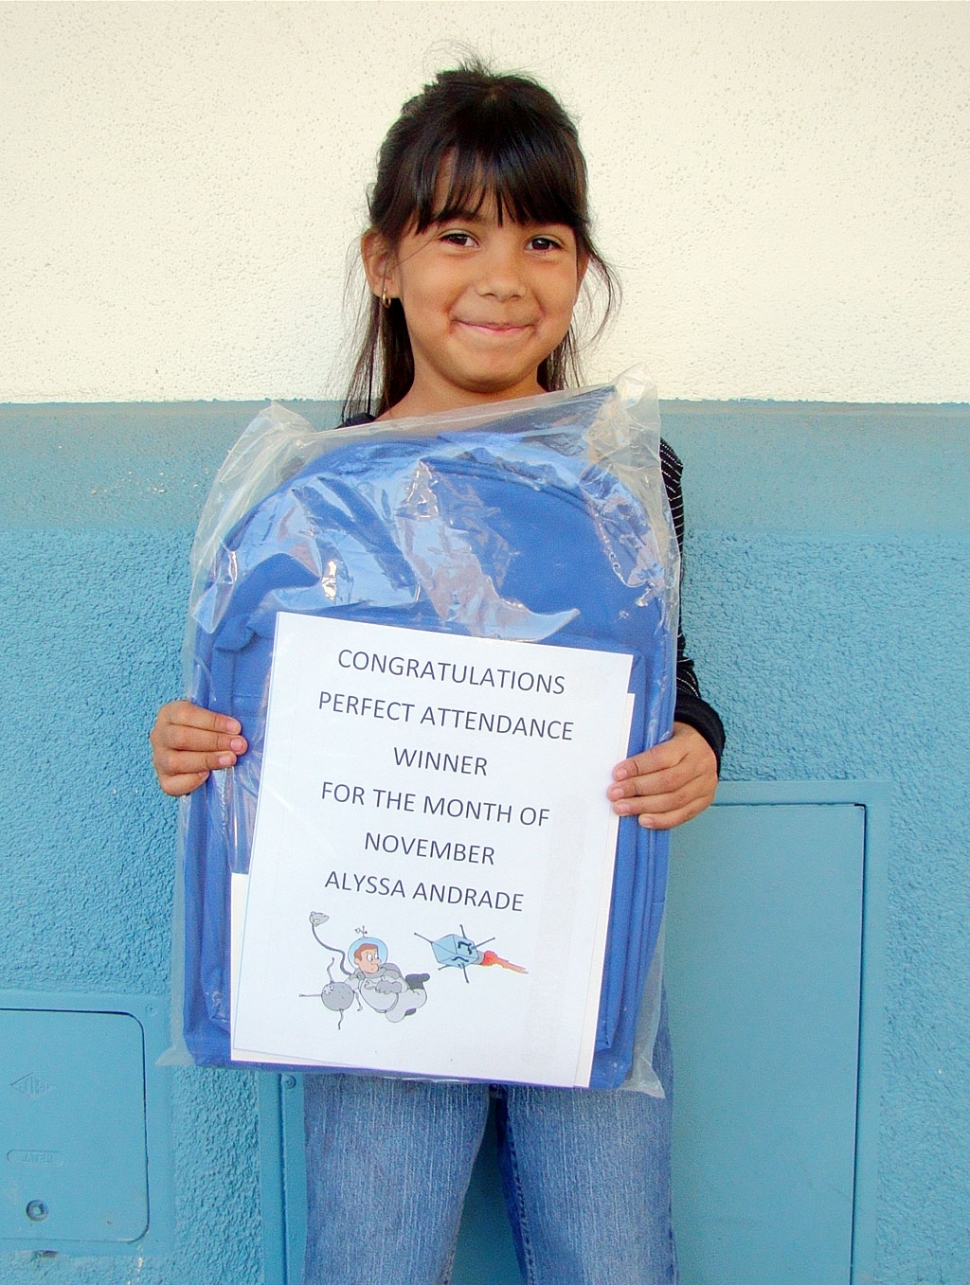 San Cayetano’s Perfect Attendance winner for the month of November is Alyssa Andrade from Ms. Swensen’s class.